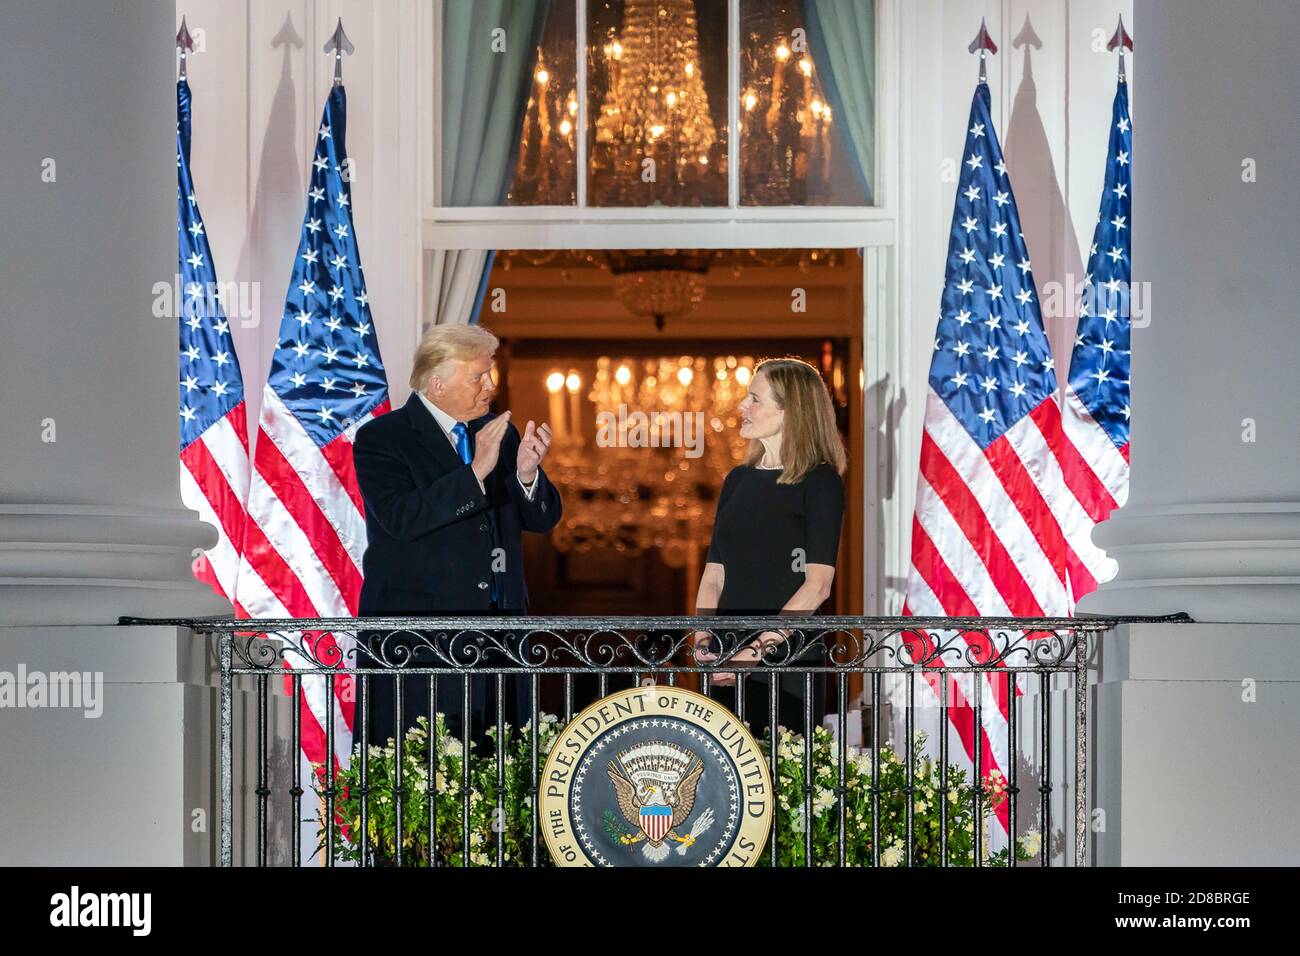 President Donald J. Trump applauds U.S. Supreme Court Associate Justice Amy Coney Barrett from the Blue Room Balcony of the White House Monday, October 26, 2020, after attending Justice Barrett’s swearing-in ceremony on the South Lawn. (USA) Stock Photo